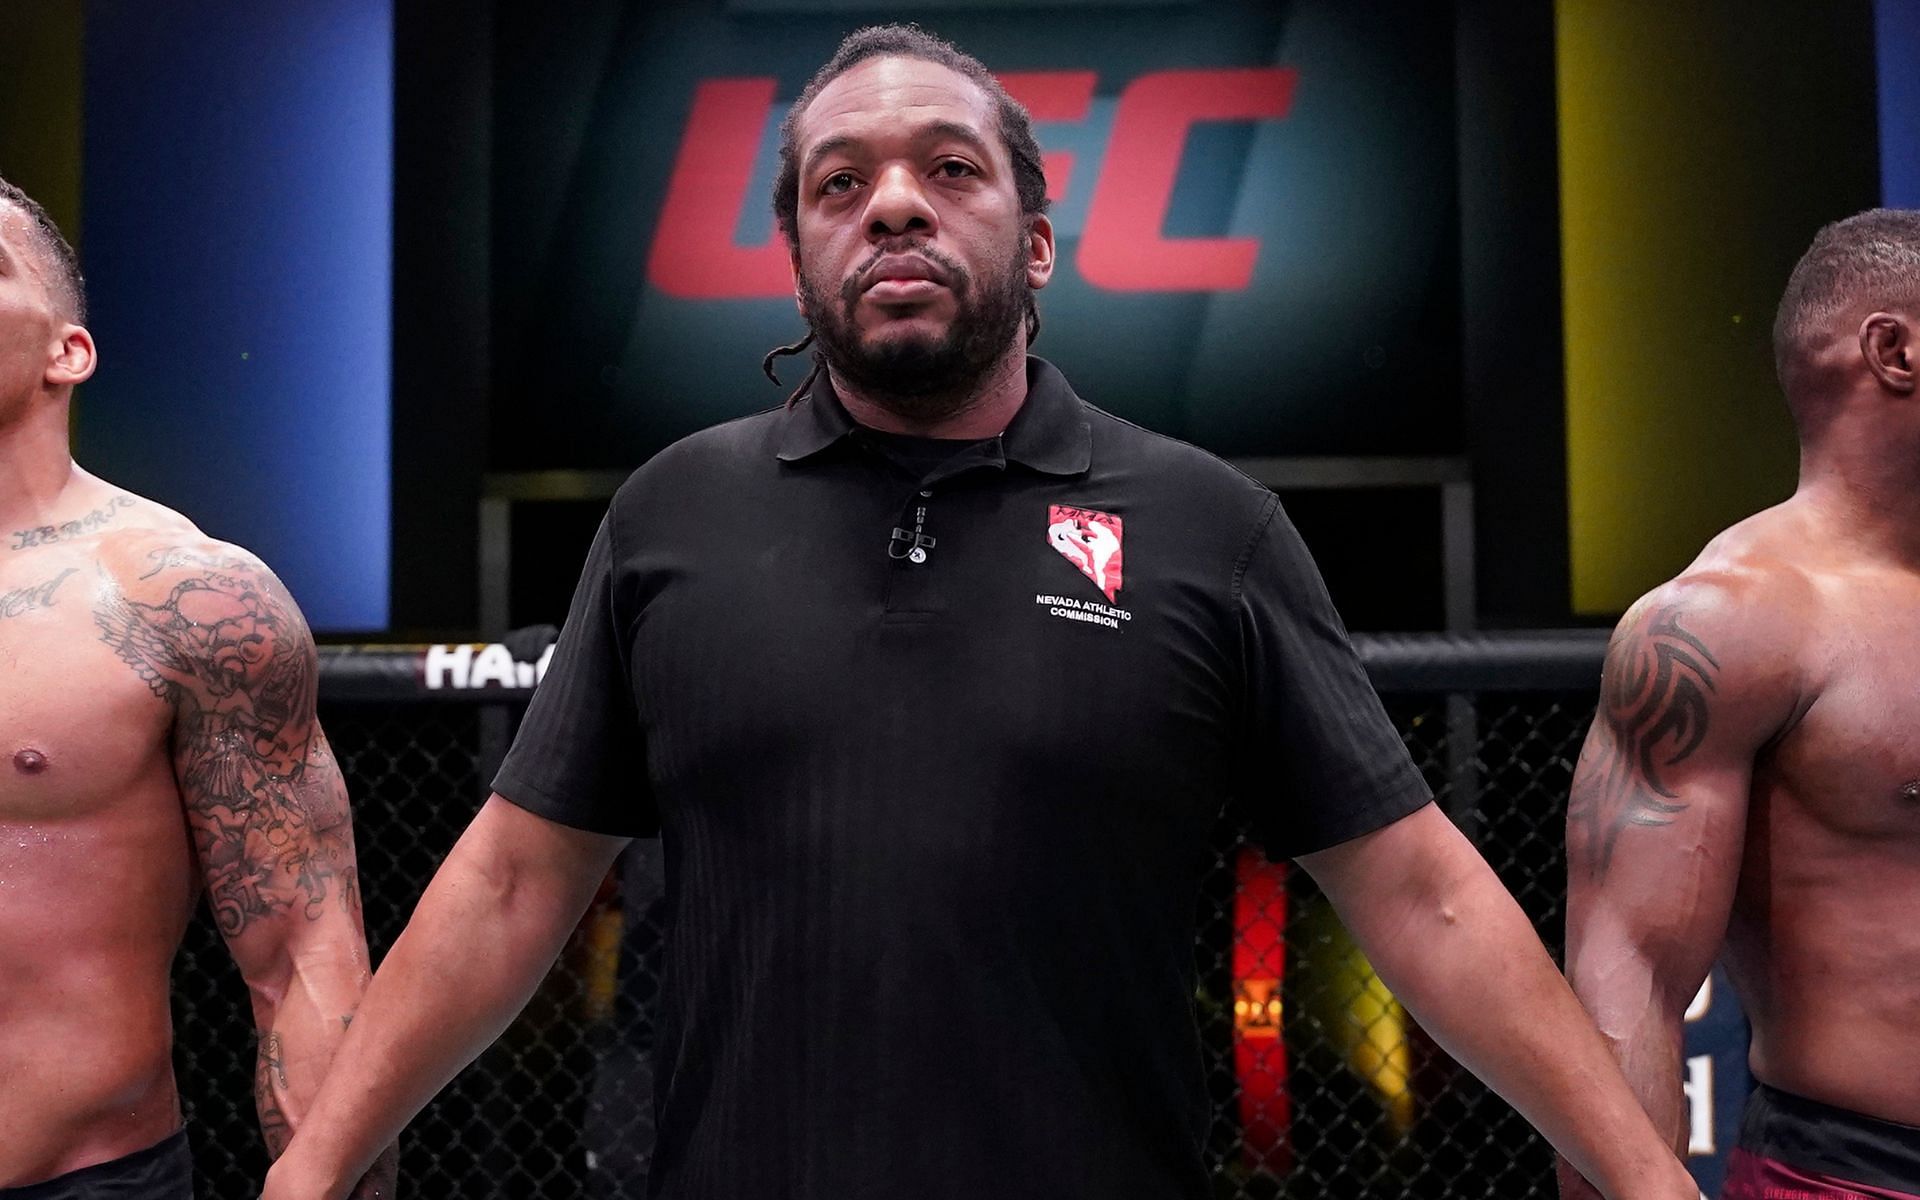 MMA referee Herb Dean [*Image courtesy: Getty Images]